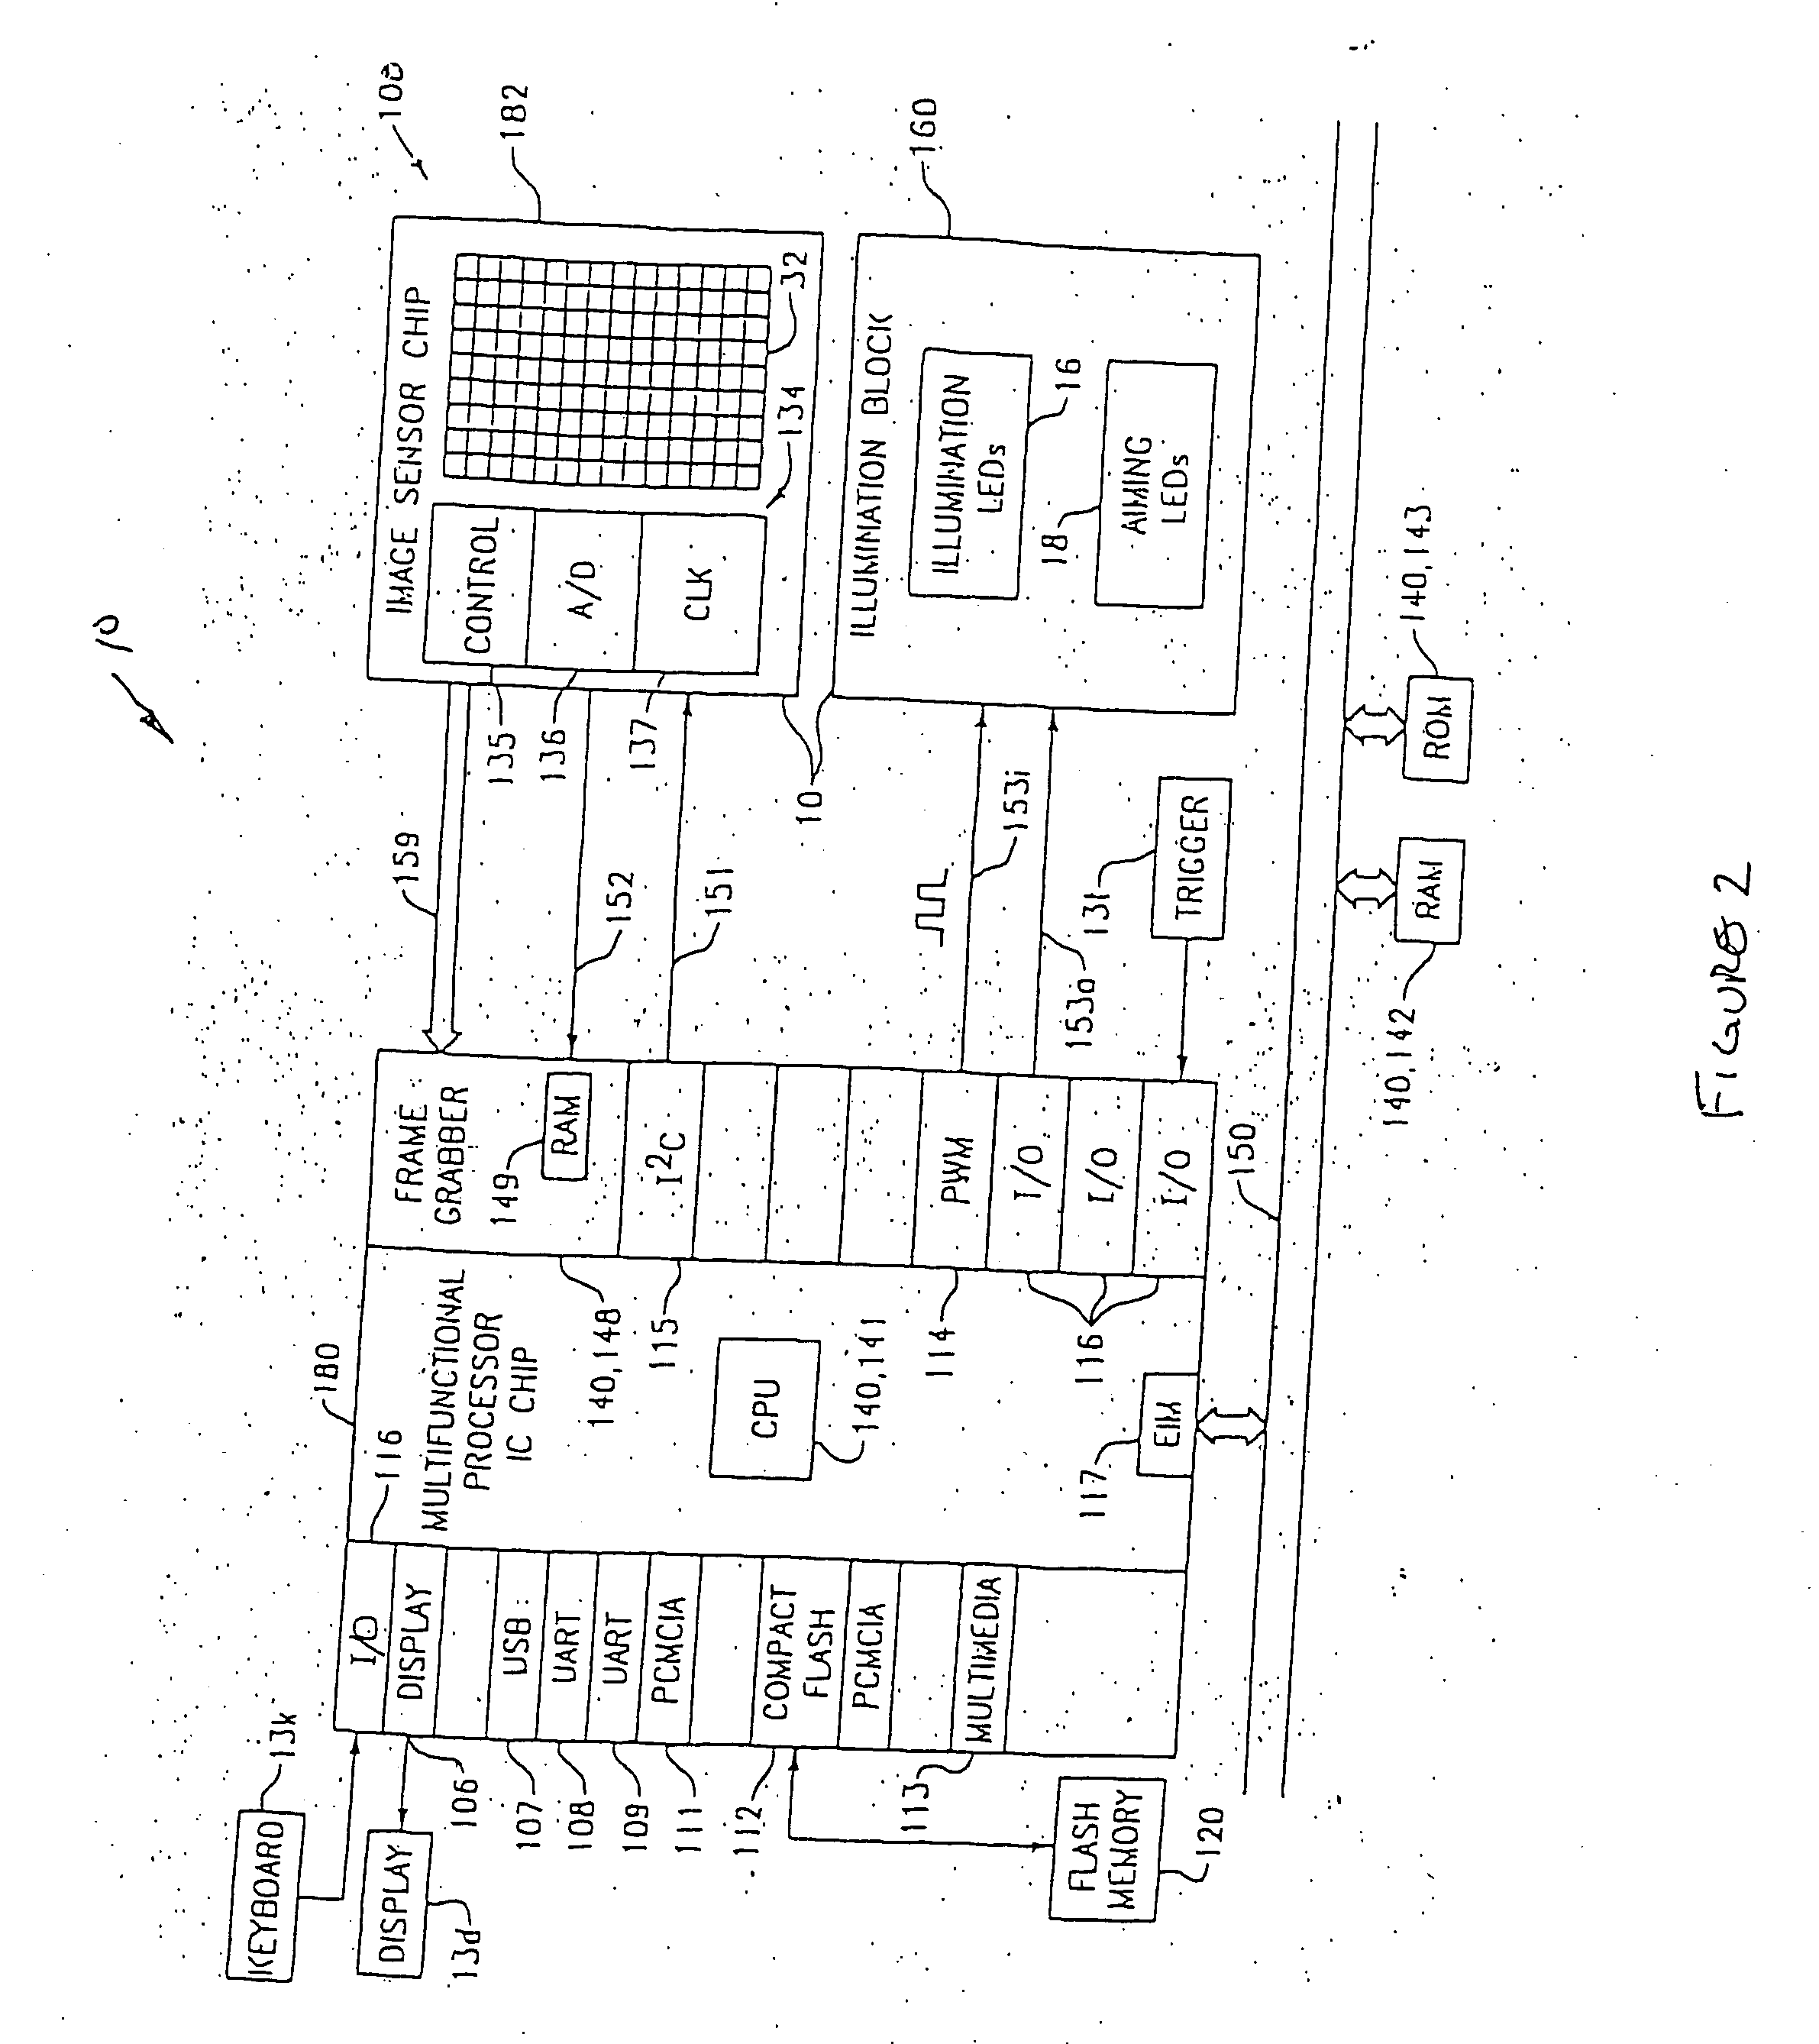 Method and apparatus for reading under sampled bar code symbols